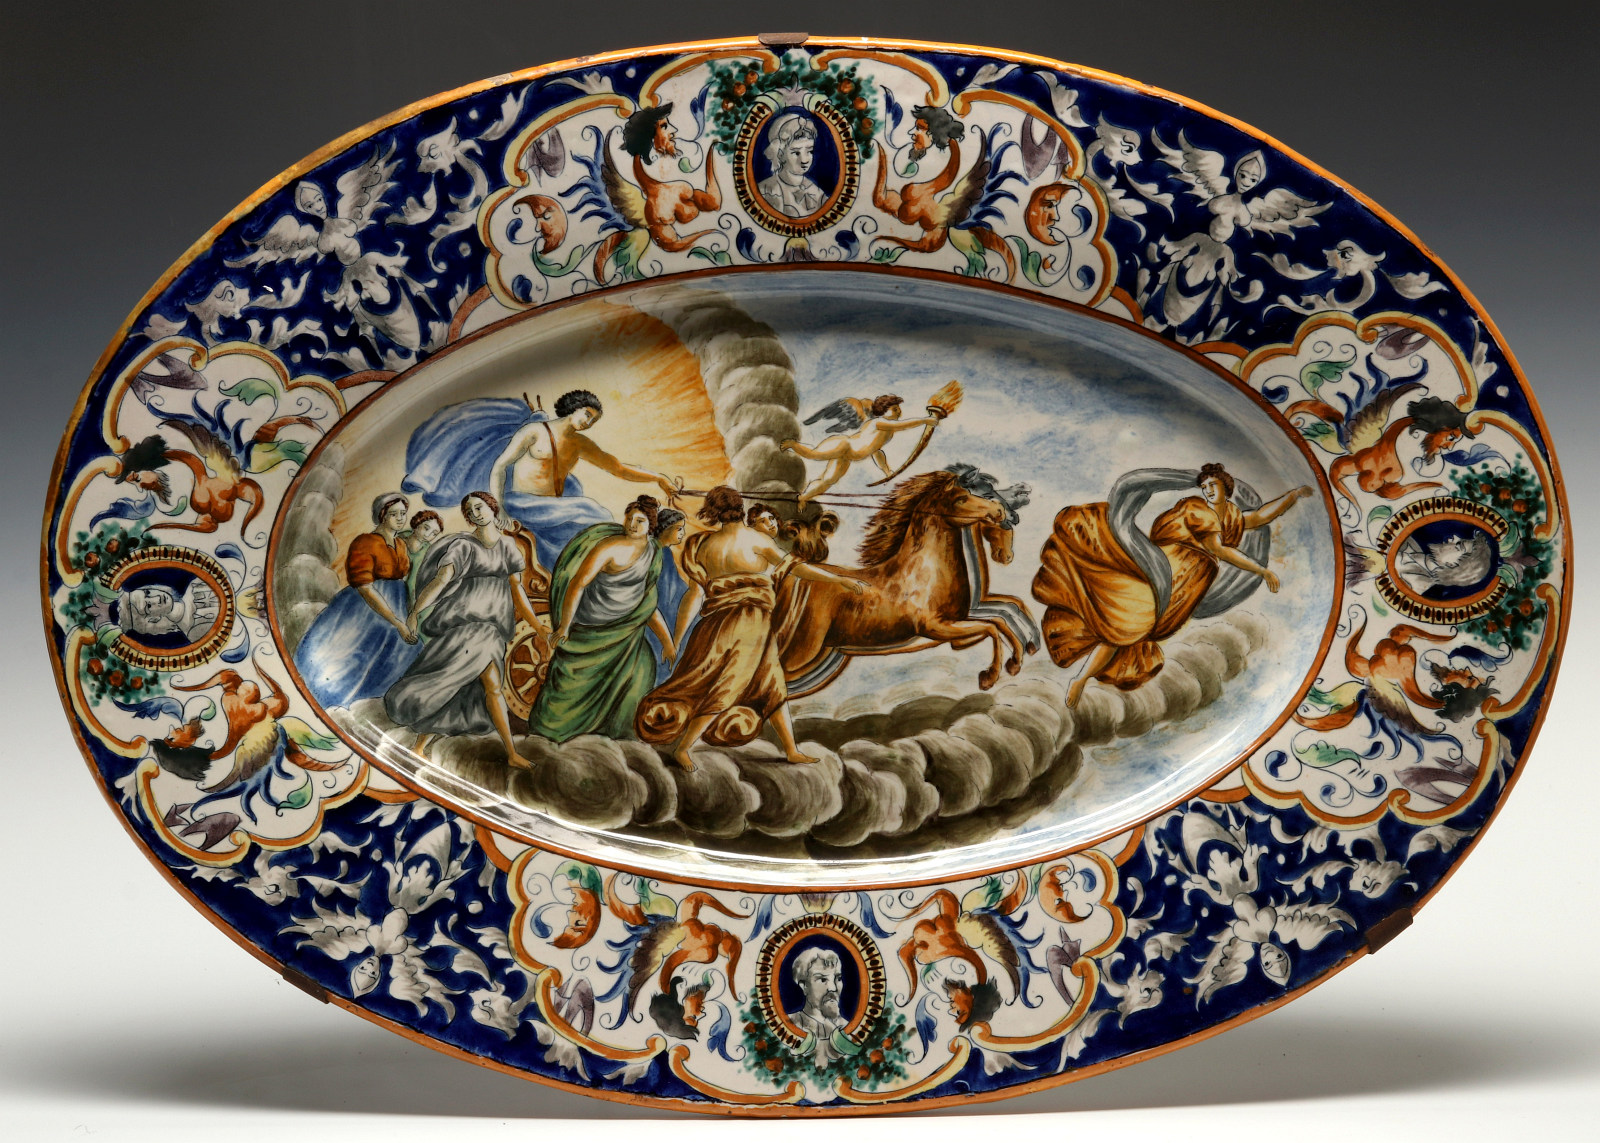 A MIDDLE 19TH C ITALIAN MAIOLICA FAIENCE CHARGER